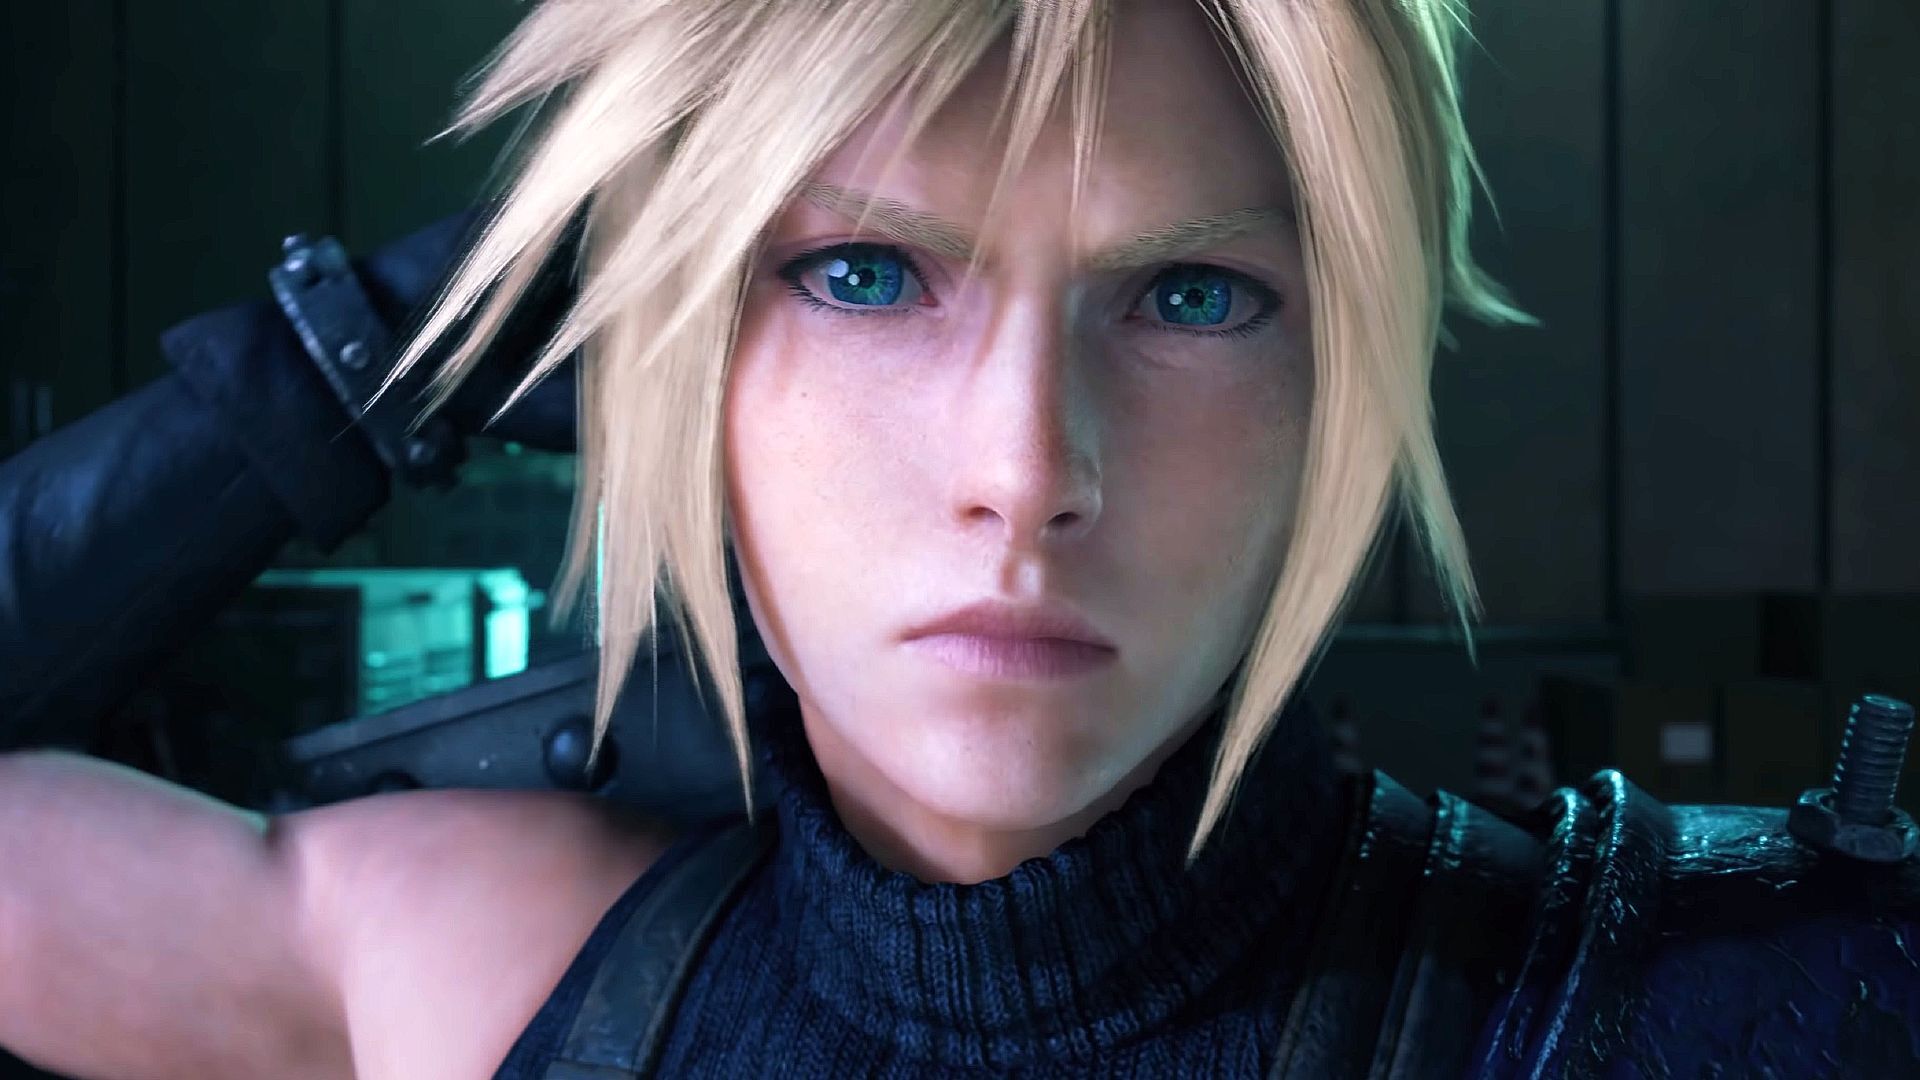 Final Fantasy 7 Remake's ending explained - and what it might mean